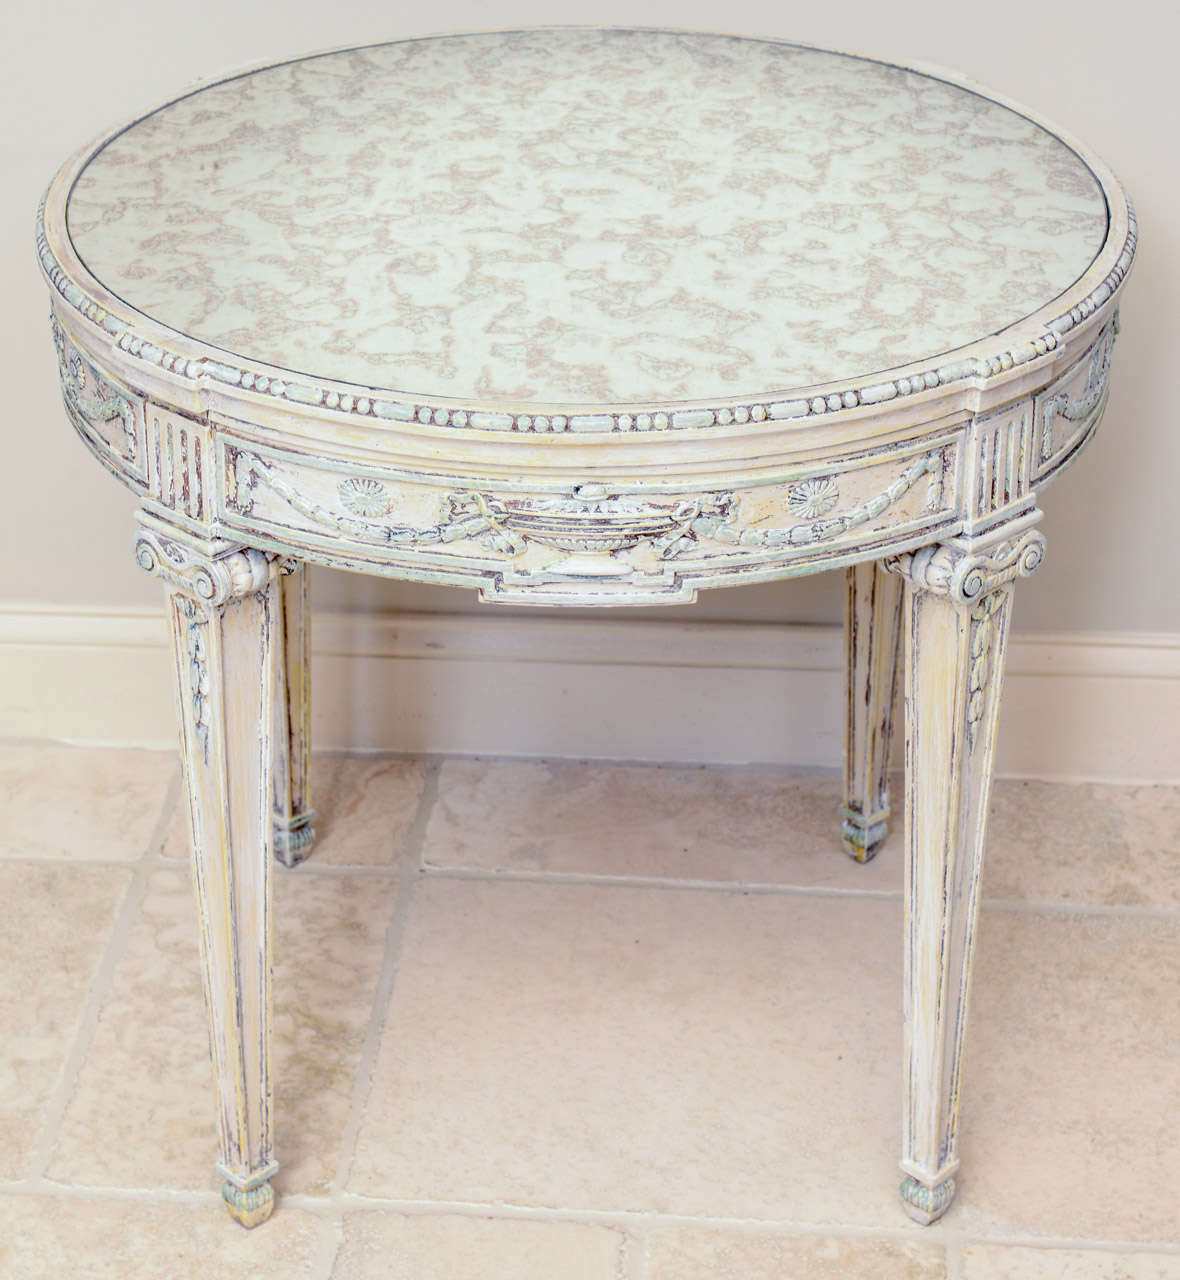 American Painted Table with Mirrored Top